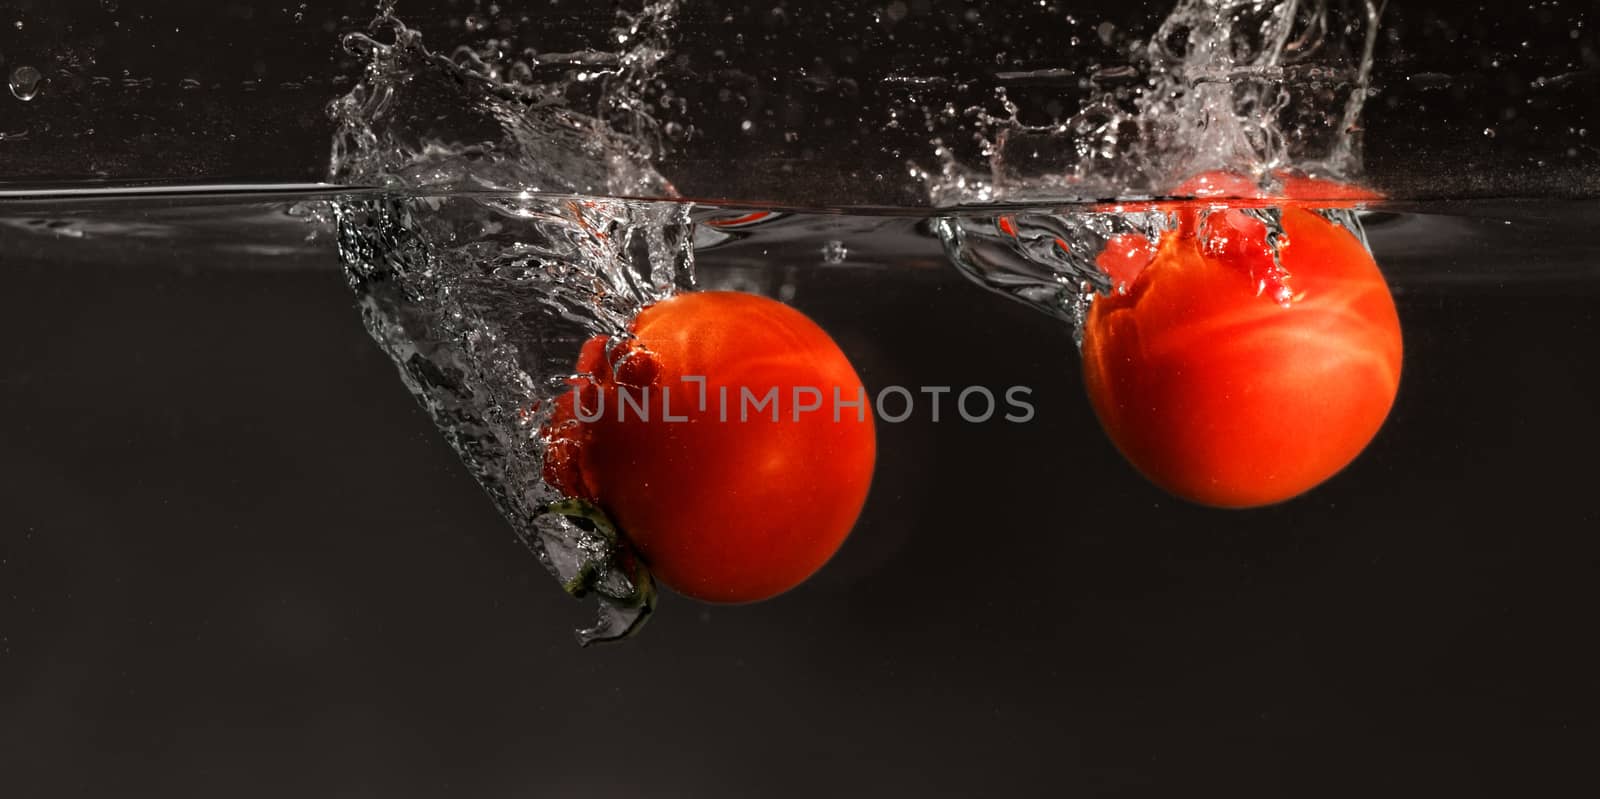 Fresh tomato dropped into water by Nneirda